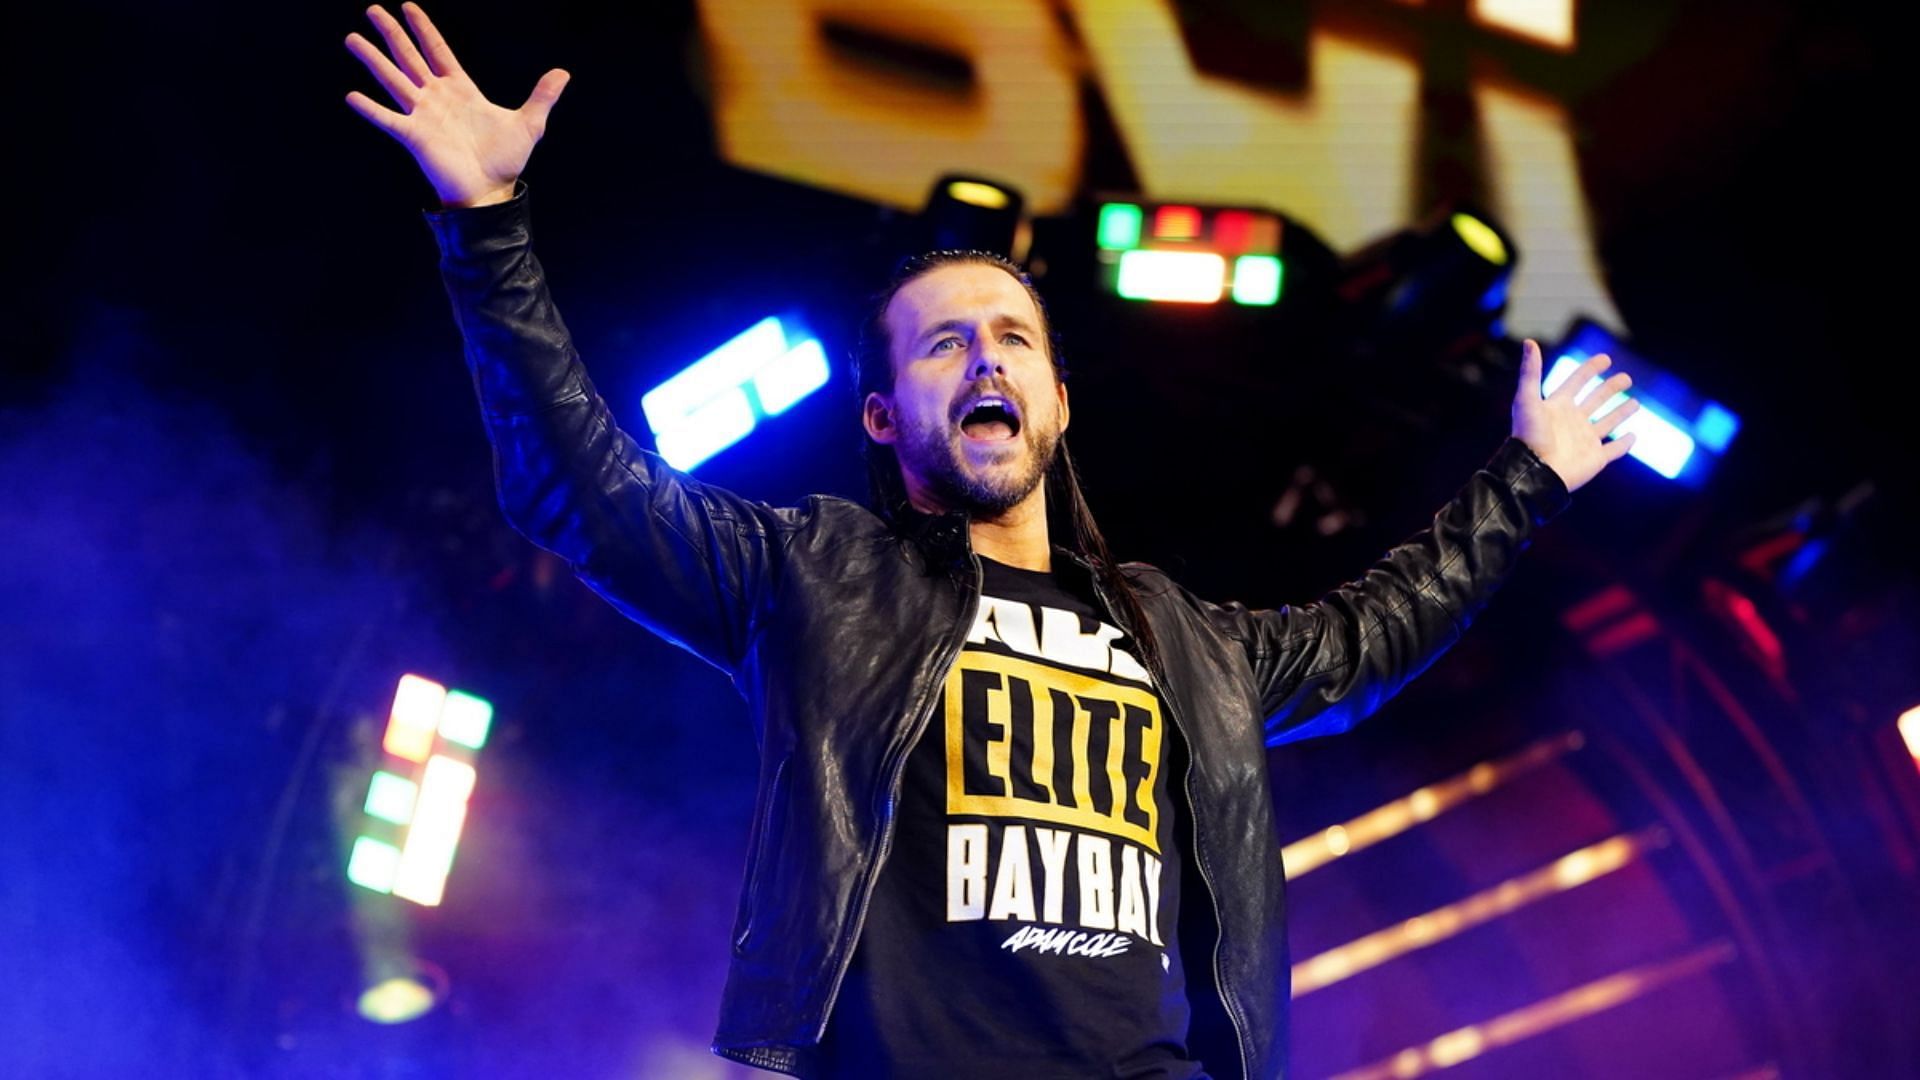 Adam Cole has received a lot of praise for his recent match.